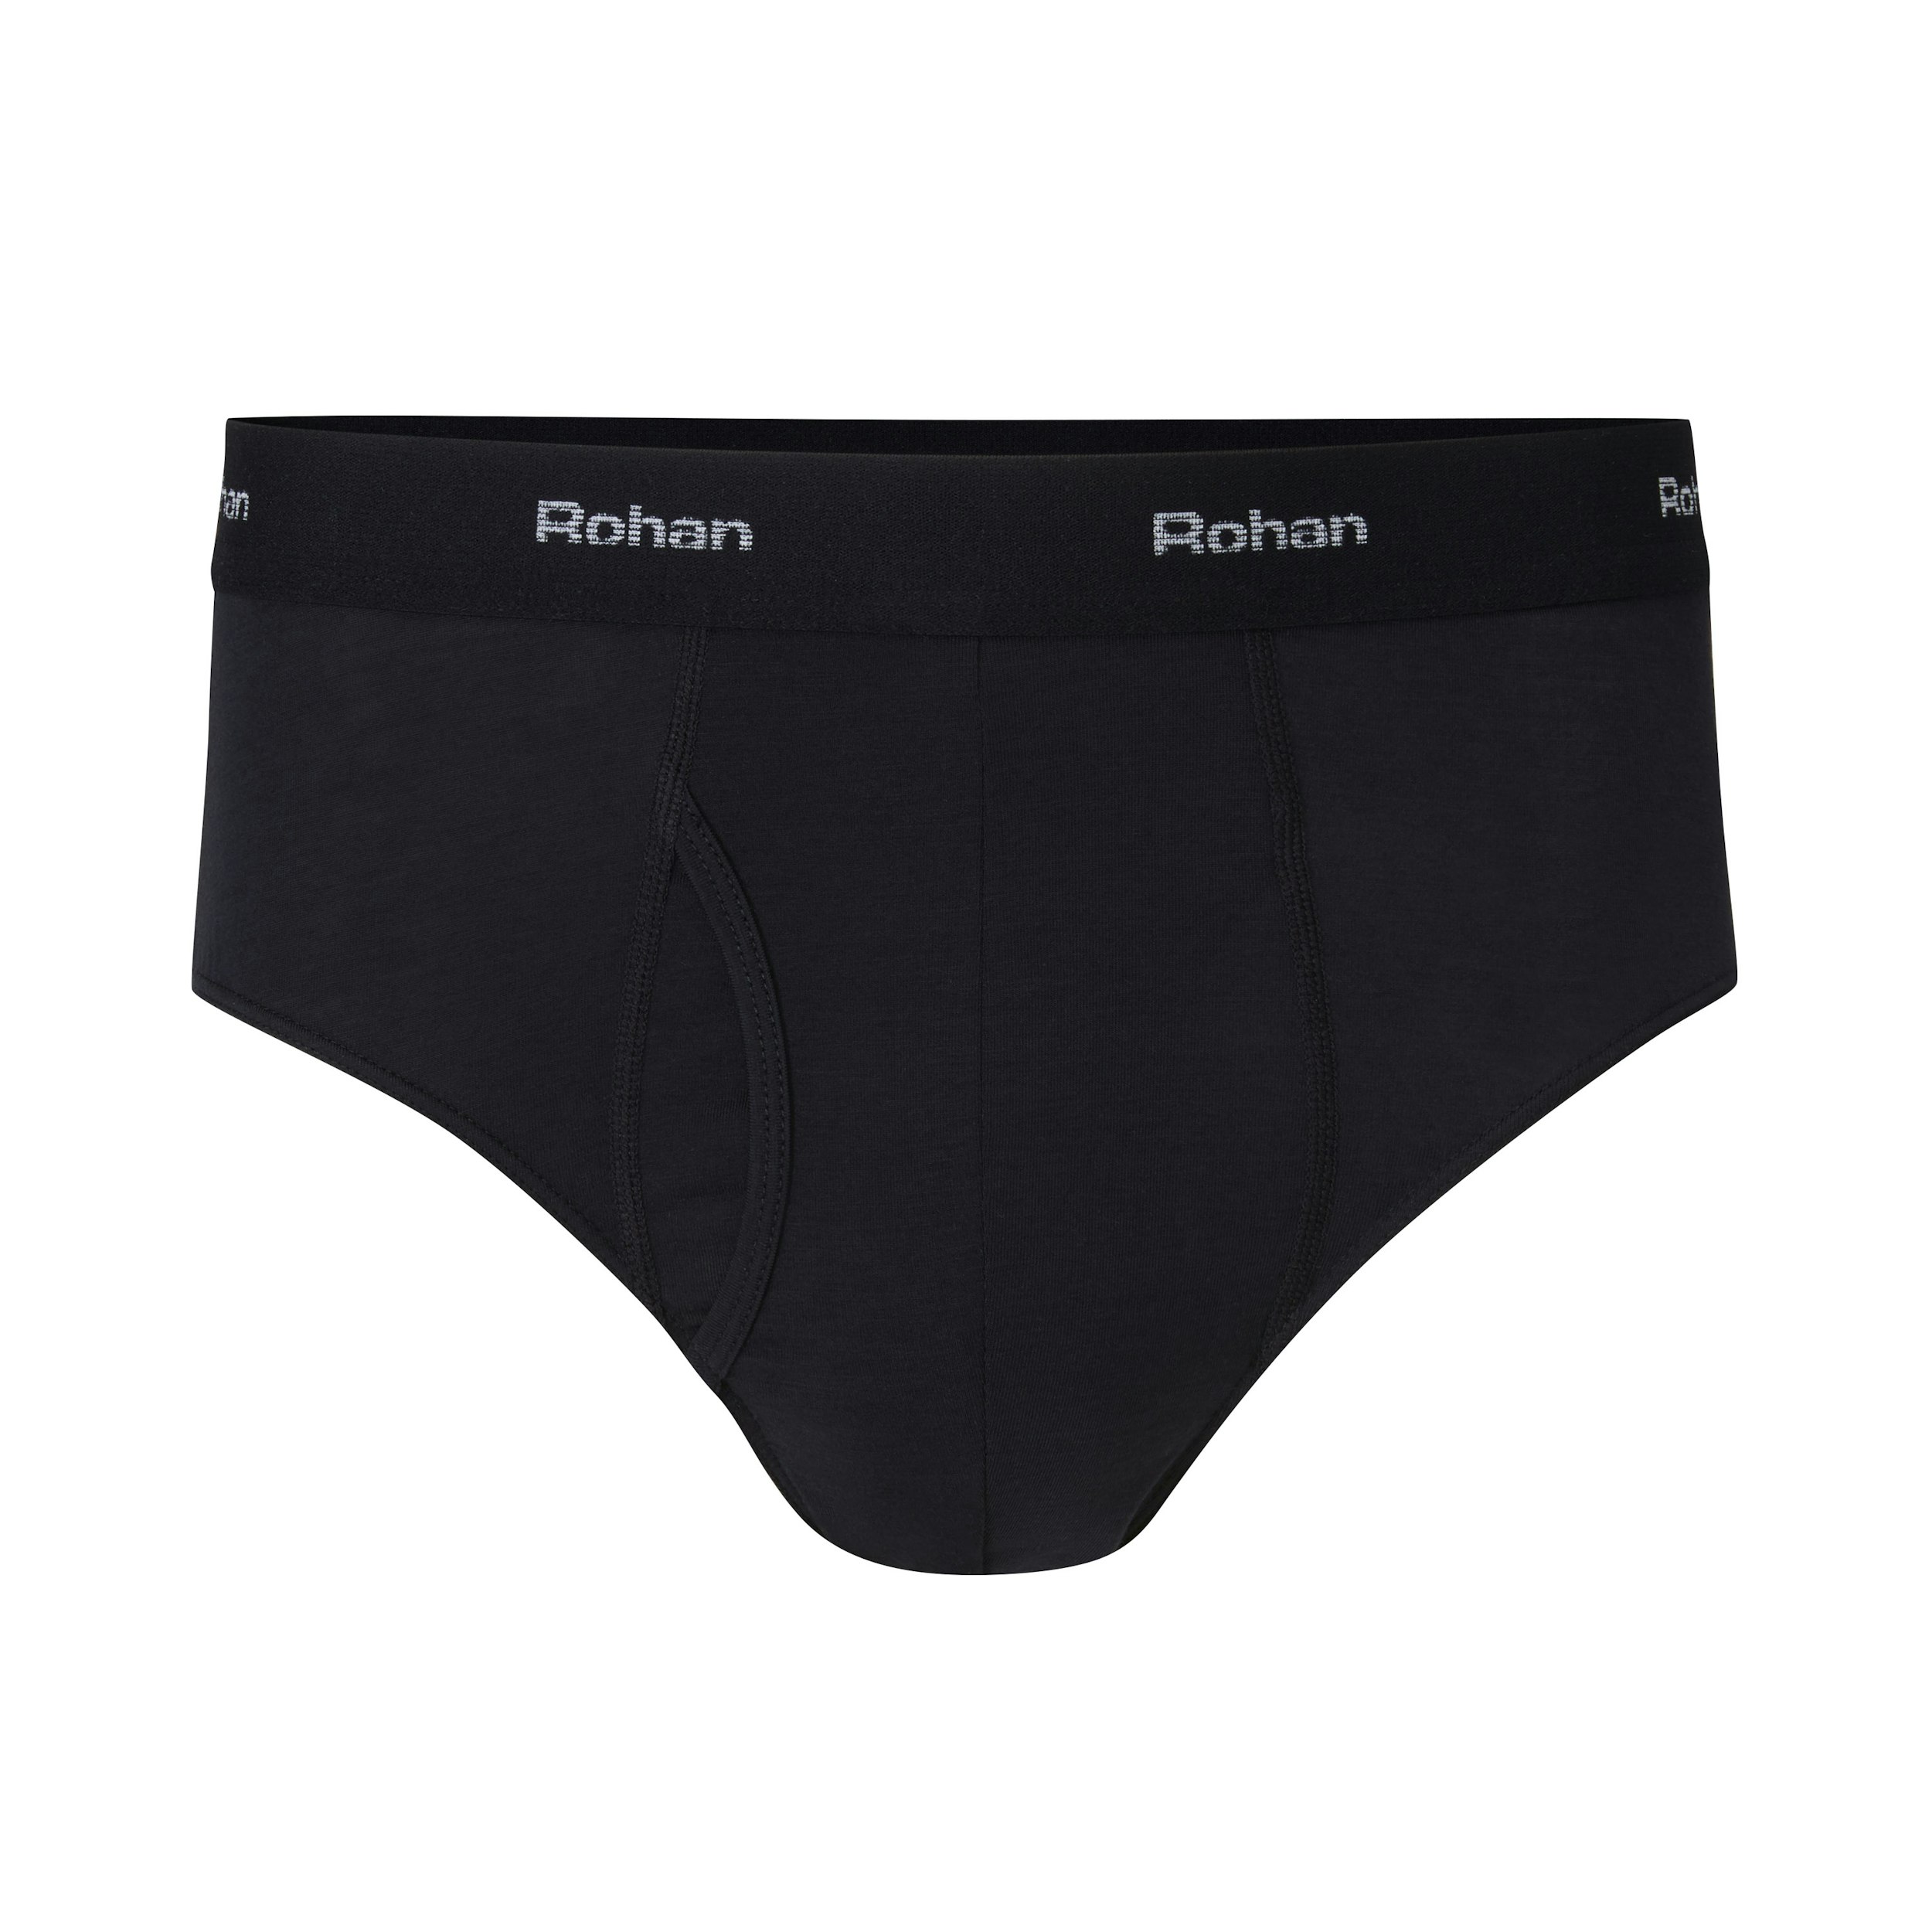 Men's Aether Briefs with Fly Opening - Lightweight, super soft brief ...